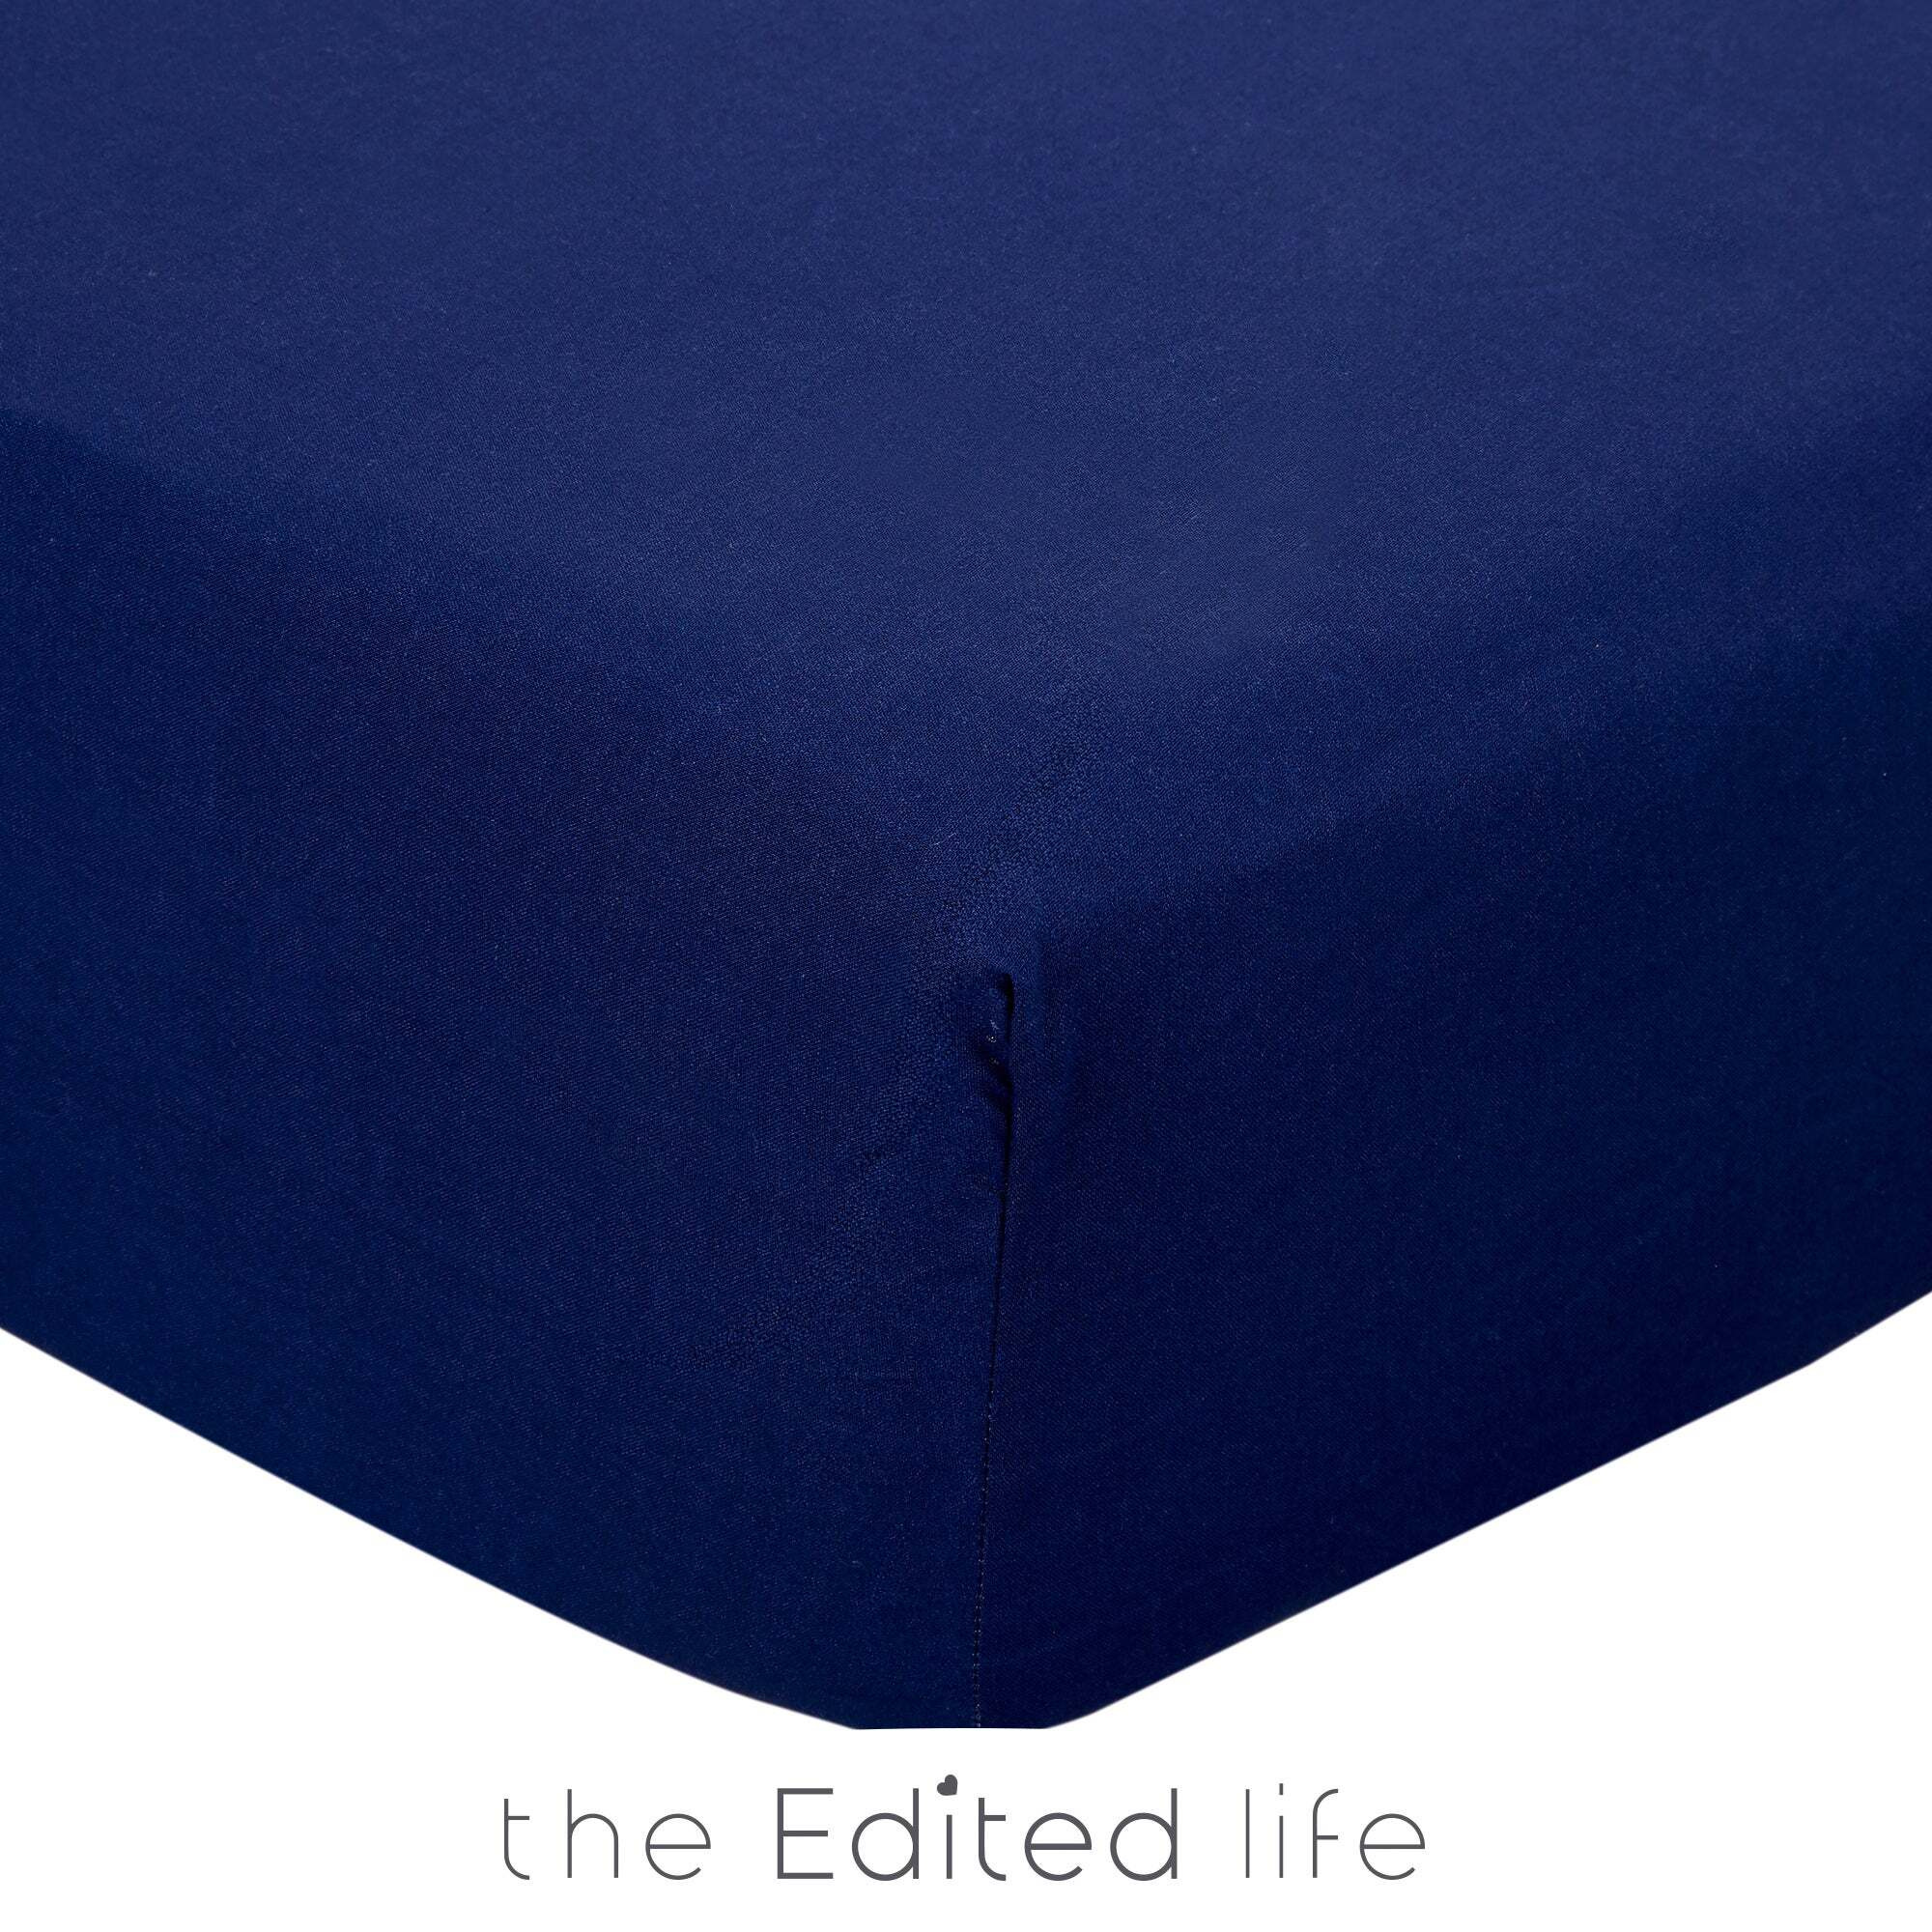 Pack of 2 100% Organic Cotton Fitted Sheets Organic Cotton Sailor Blue